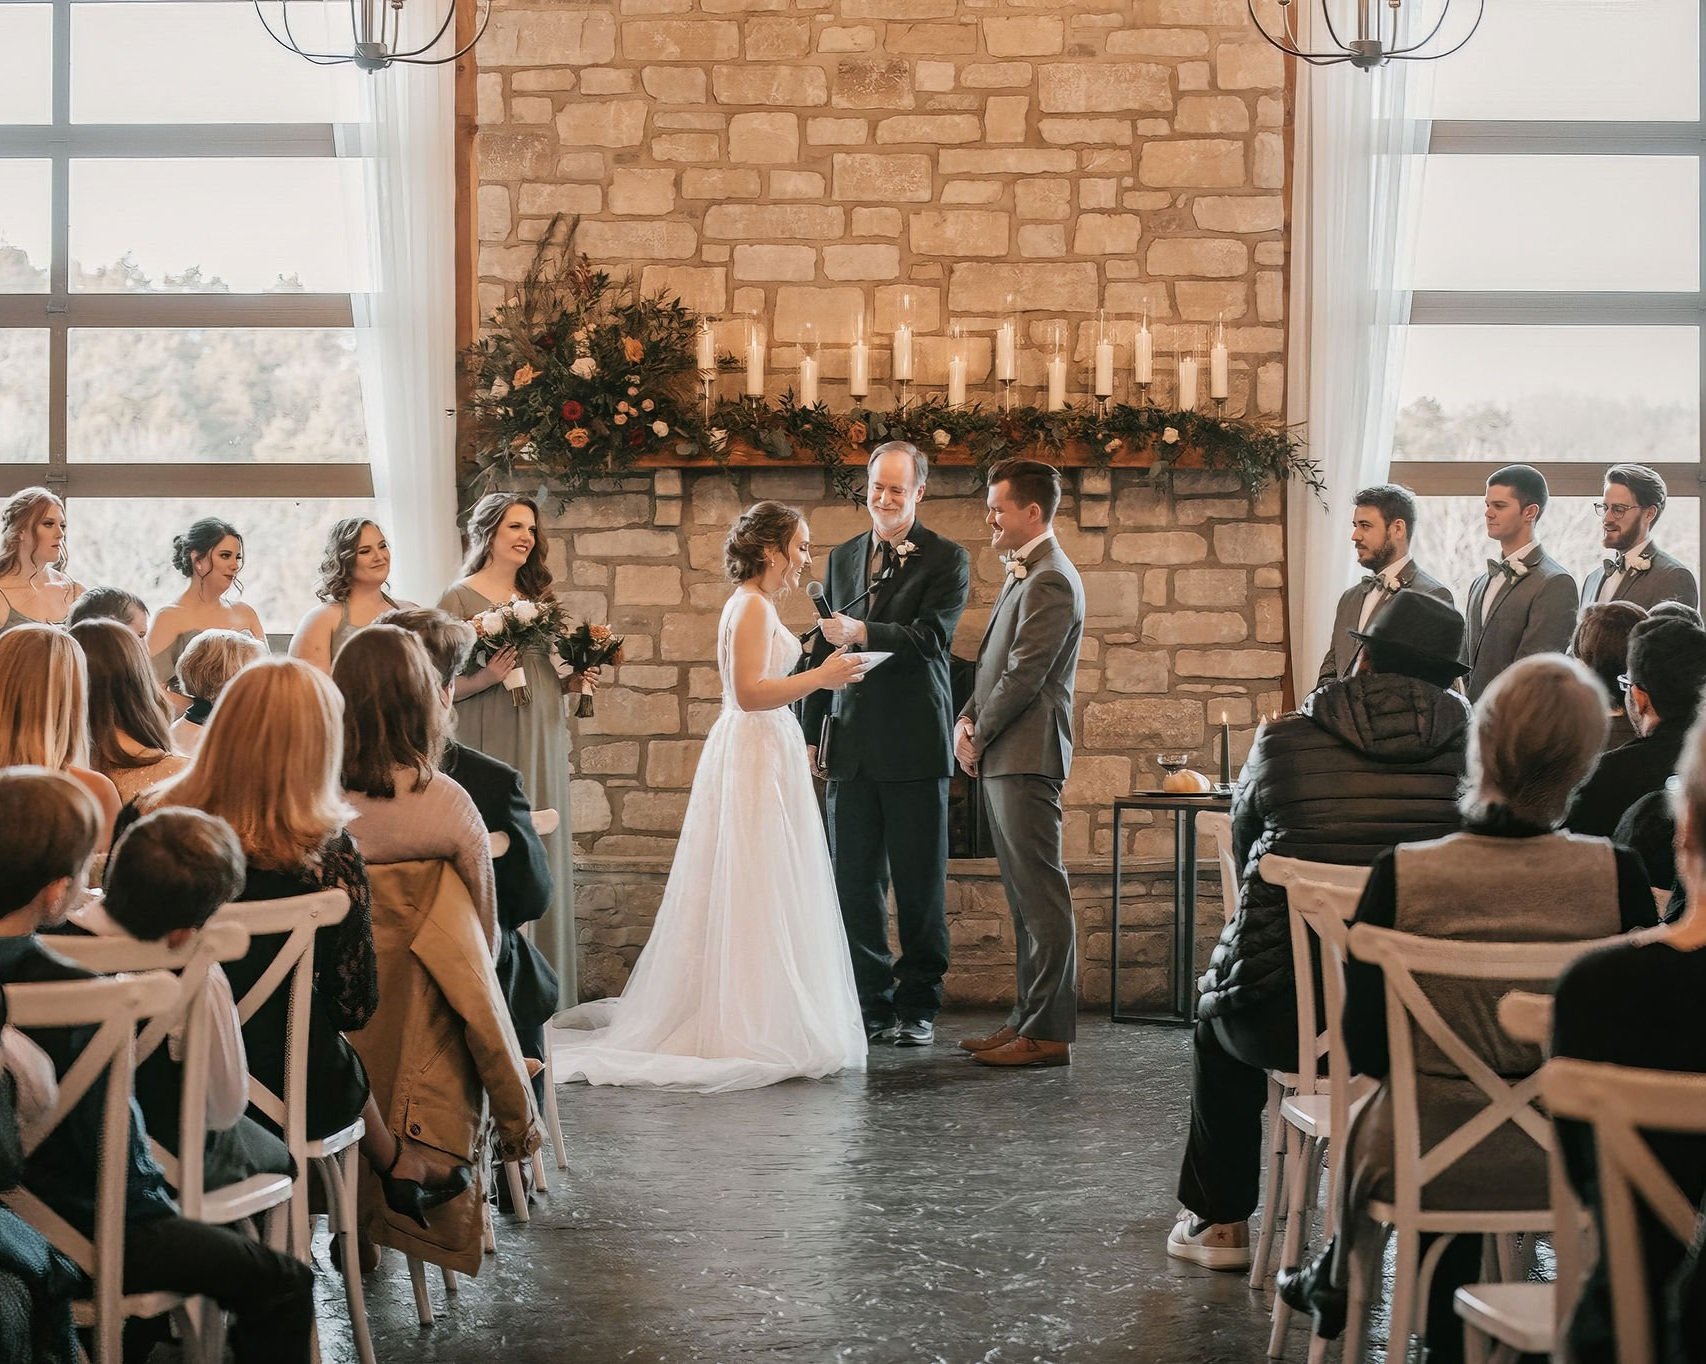 Winter Green and Red Berry Picks — Haue Valley: St. Louis Wedding Venues